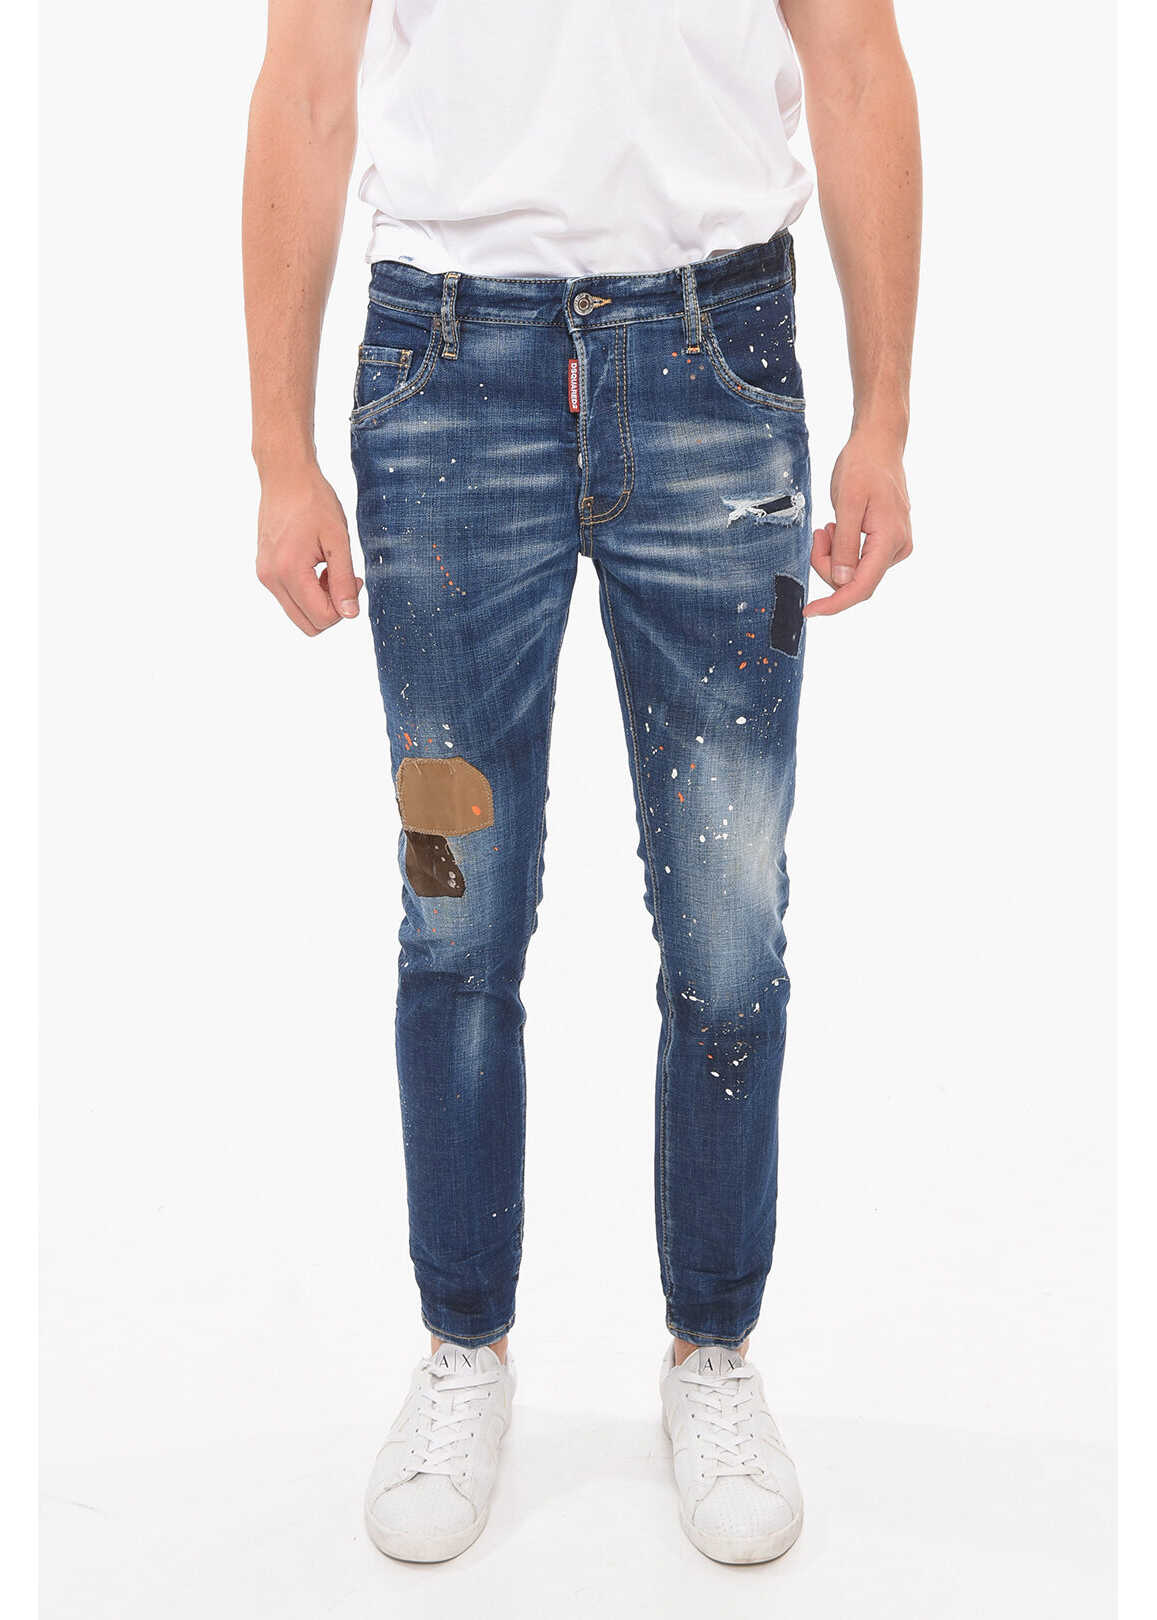 DSQUARED2 Paint-Splatter-Printed Skater Denims With Patch Detailing Blue